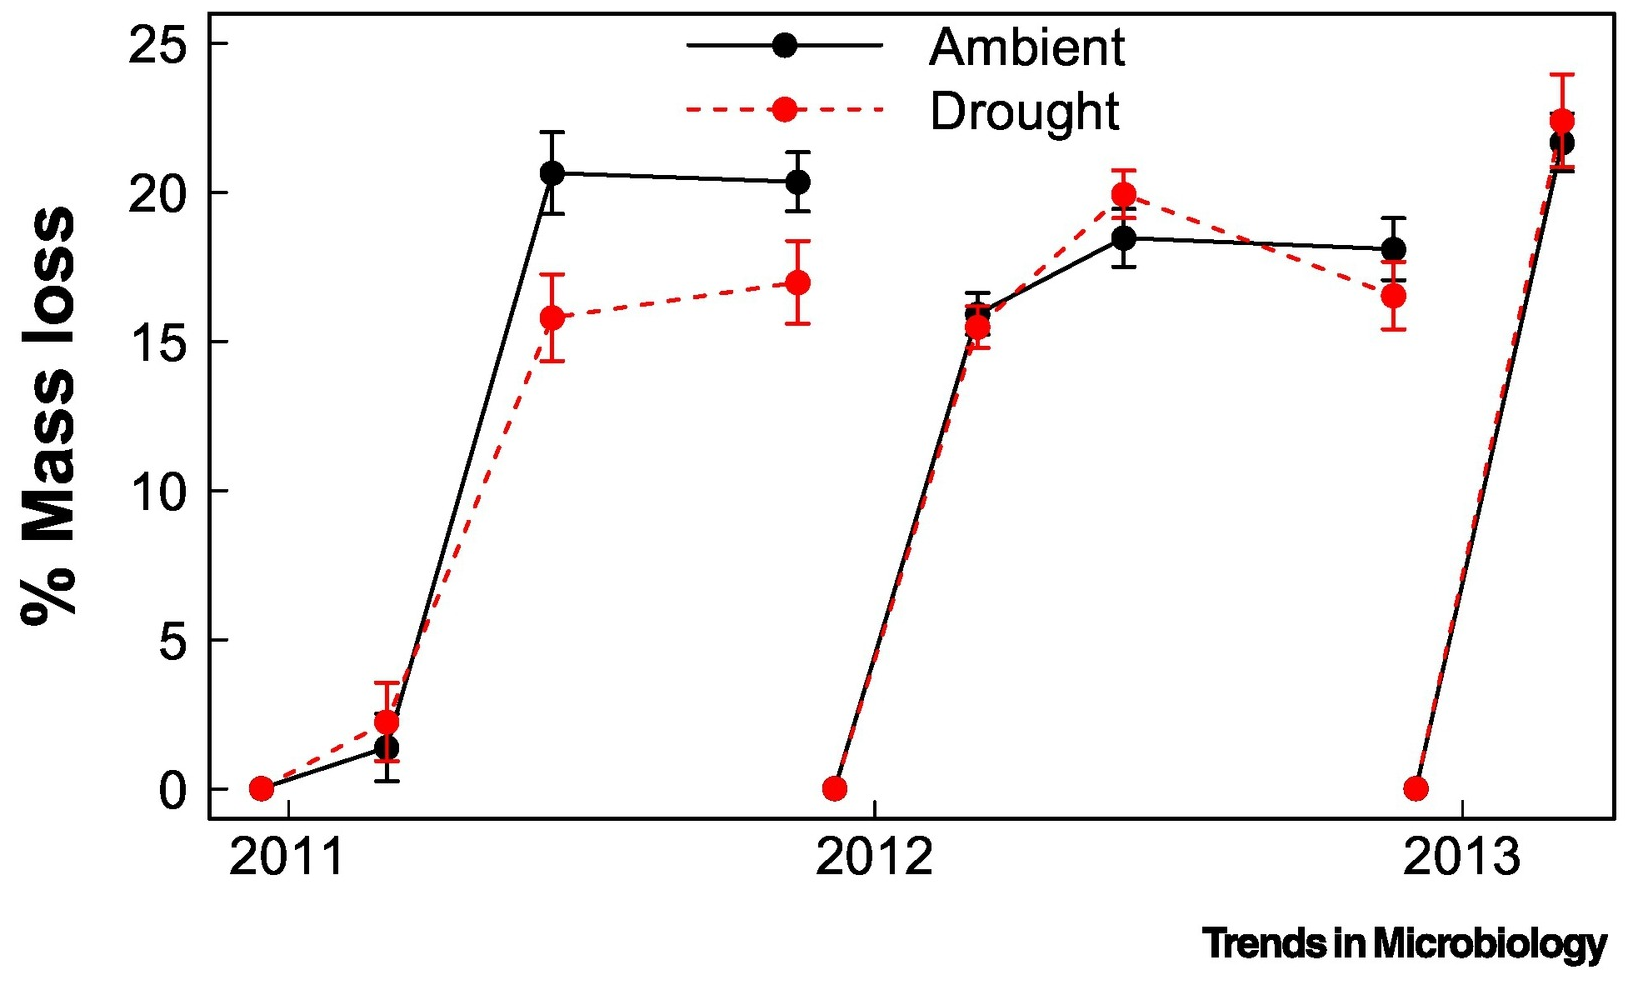 Graph showing that the legacy of drought exposure inhibits soil microbiome functioning for one year. Microbiomes from ambient and drought plots in California grassland were transplanted onto sterilized grassland litter which decomposed in the field for 1 year. Microbiomes were then collected at the end of the year and inoculated onto fresh litter for two subsequent years. Microbiomes originating from drought plots decomposed significantly less litter mass, but only during the first year. Figure adapted from Martiny, et al., 2017. Graphic: Steven D. Allison, 2023 / Trends in Microbiology